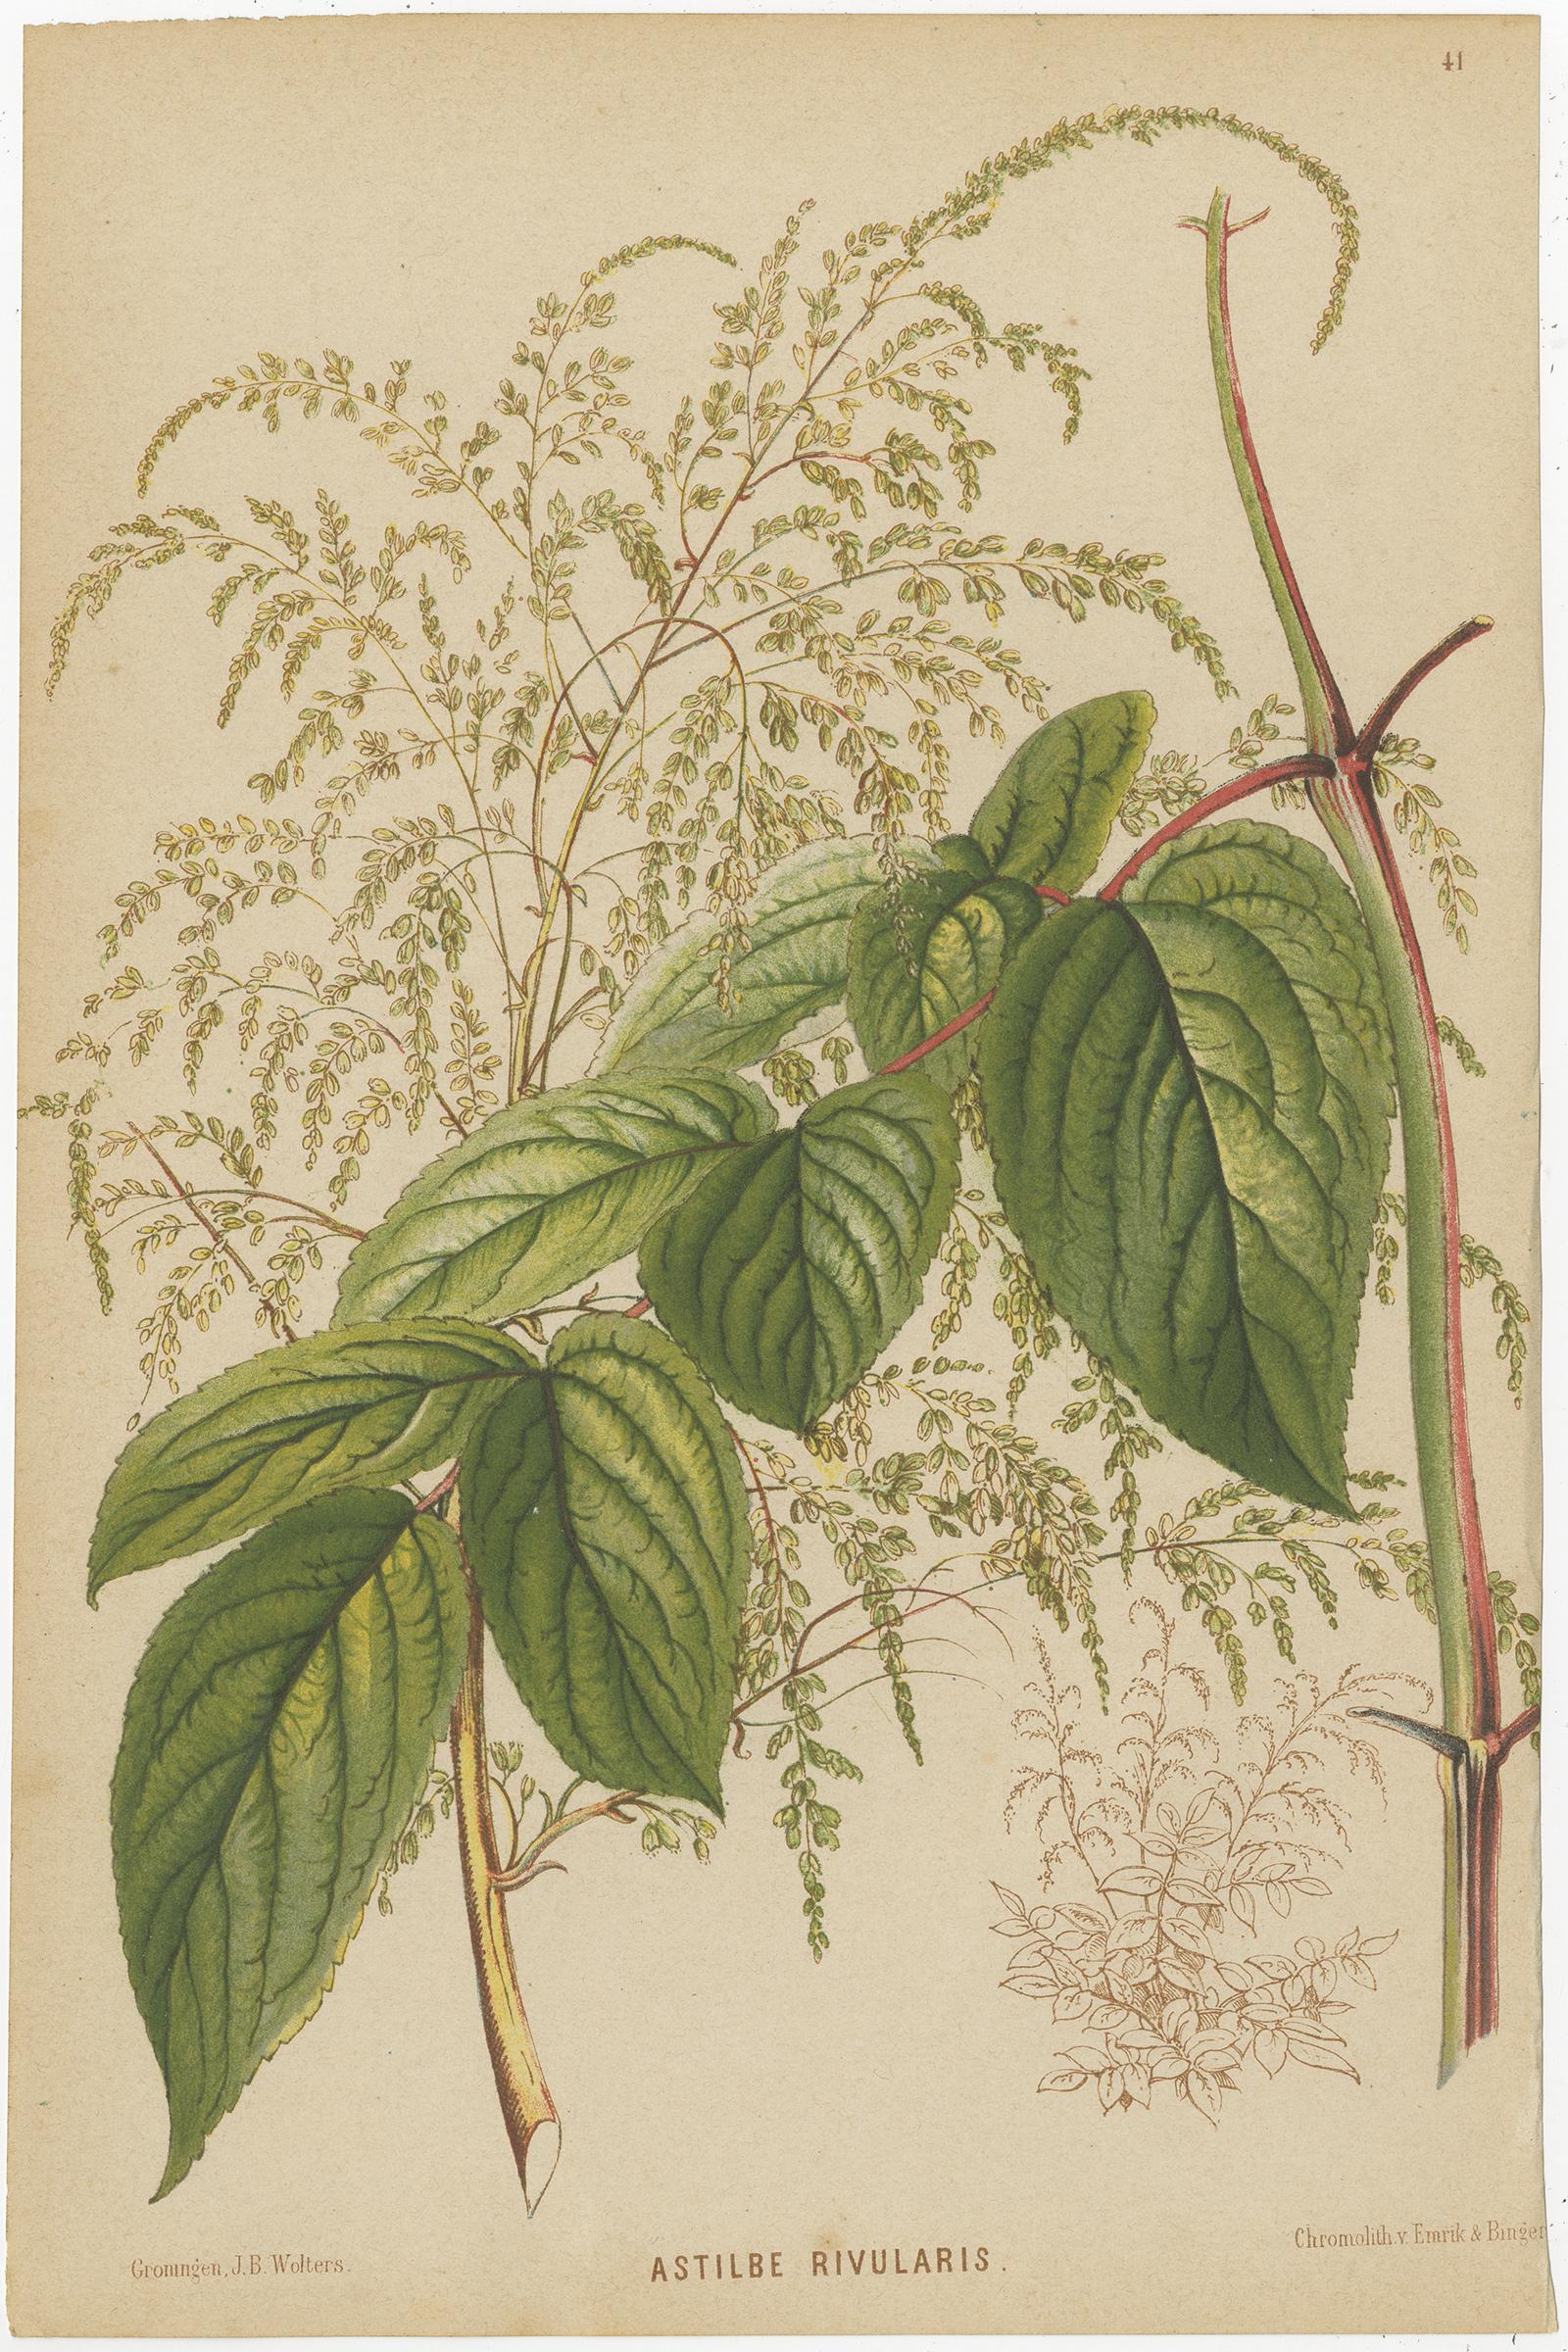 Set of three antique botany prints titled 'Astilbe Rivularis - Reus van Zuidwijk - Ficus Suringarii White'. It shows the spirea, a strawberry plant and a ficus. These prints originates from 'Neerland's Plantentuin' by C.A.J.A. Oudemans. Published by